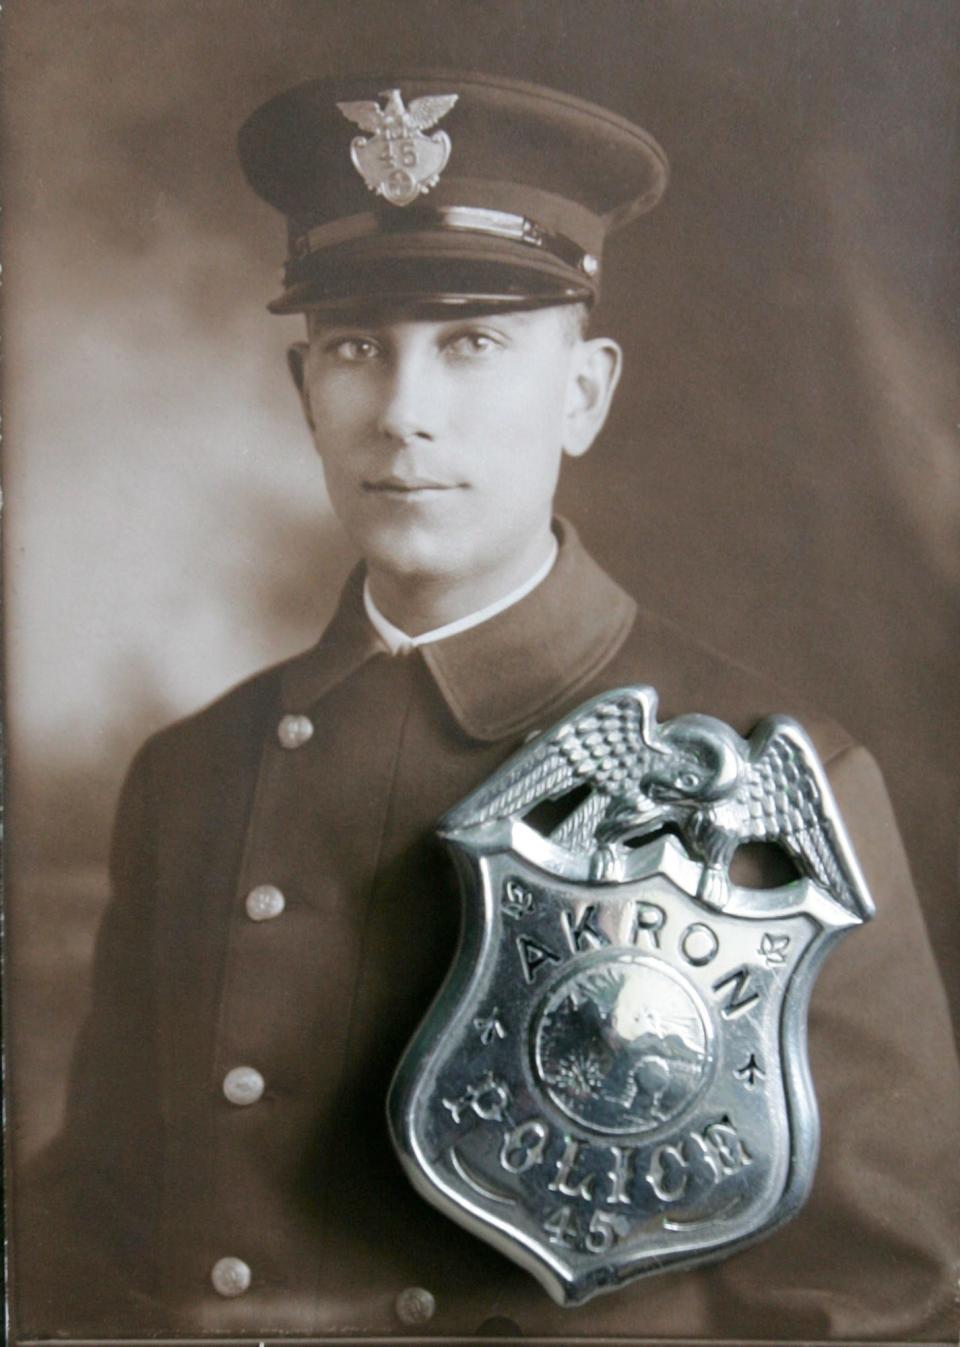 Akron Patrolman George Werne was killed in the line of duty in 1919. Tom Dye bought Werne’s badge from a collector and returned it to his family in 2009.